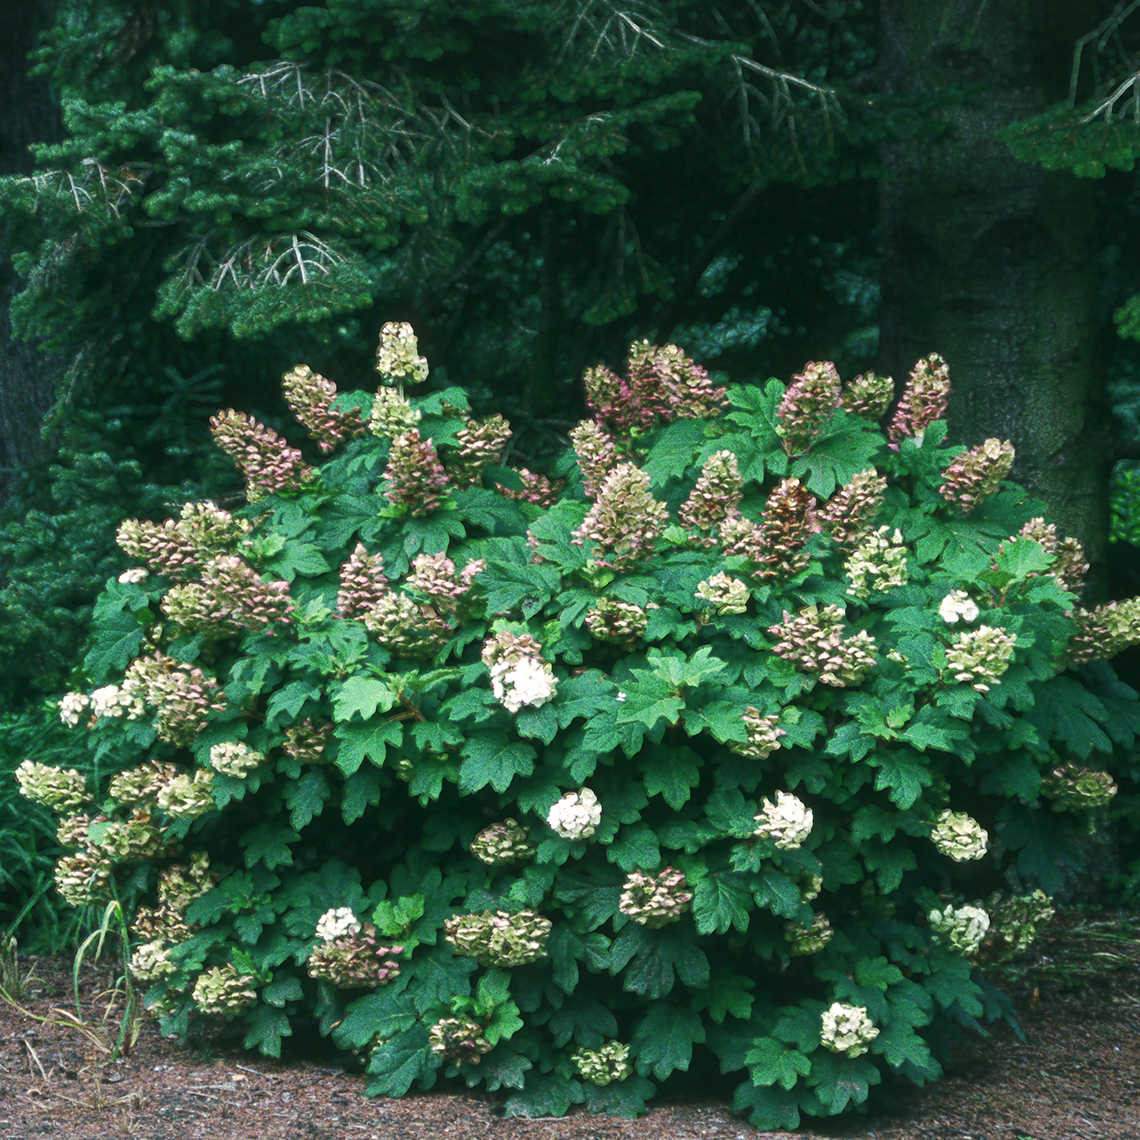 Snow Queen hydrangea in the landscape with its white blooms fading to brown